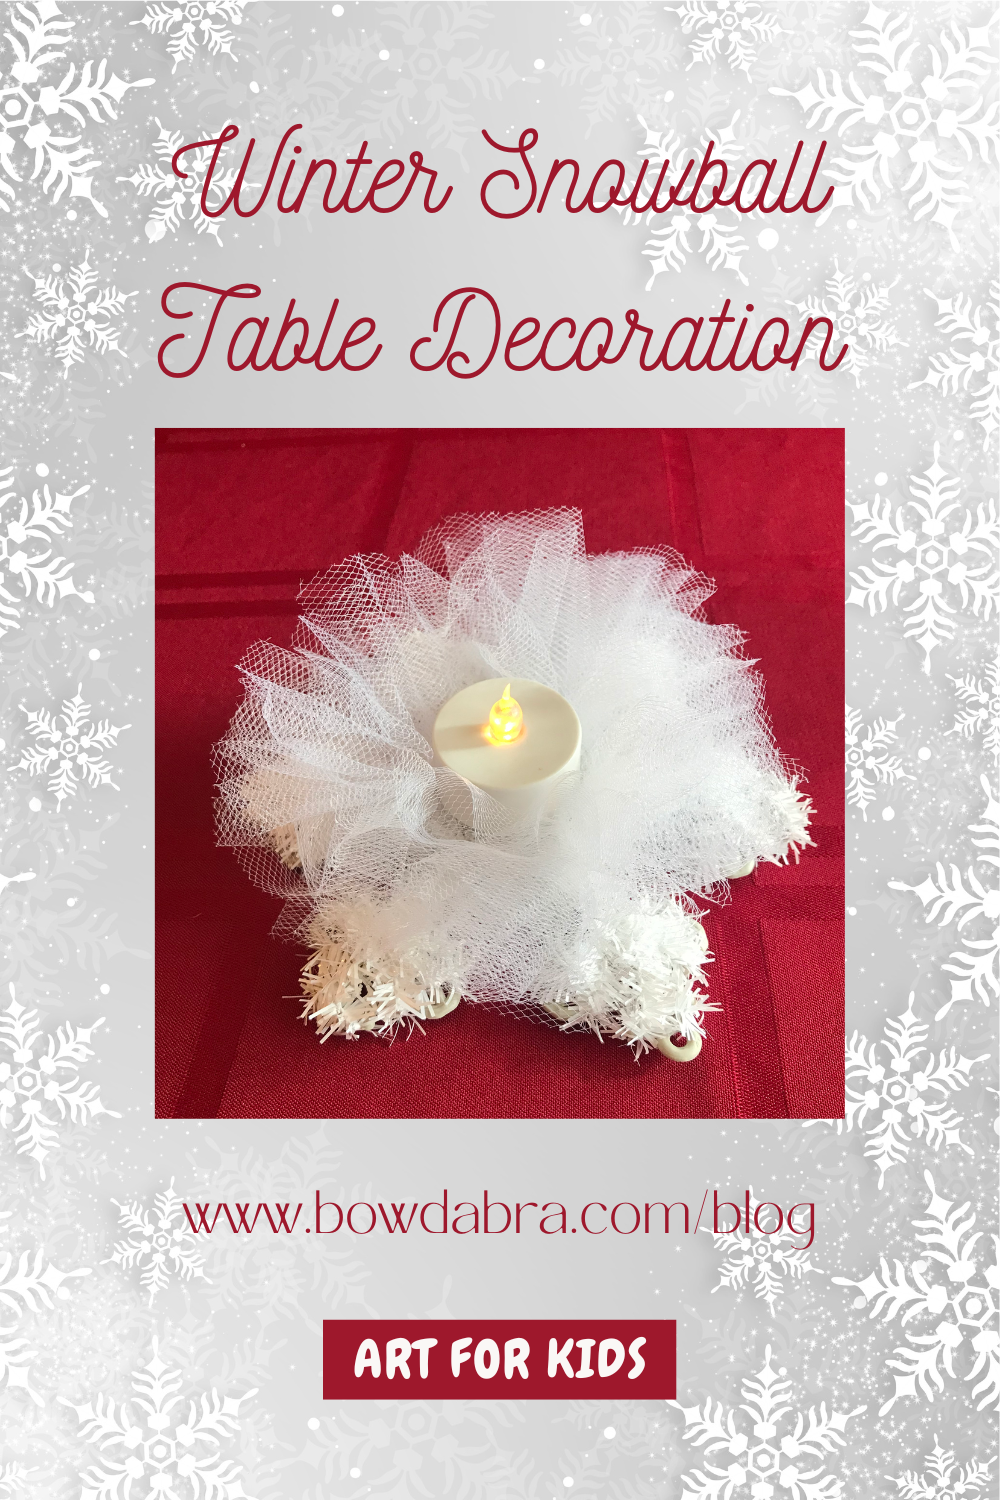 Winter Snowball Table Decoration